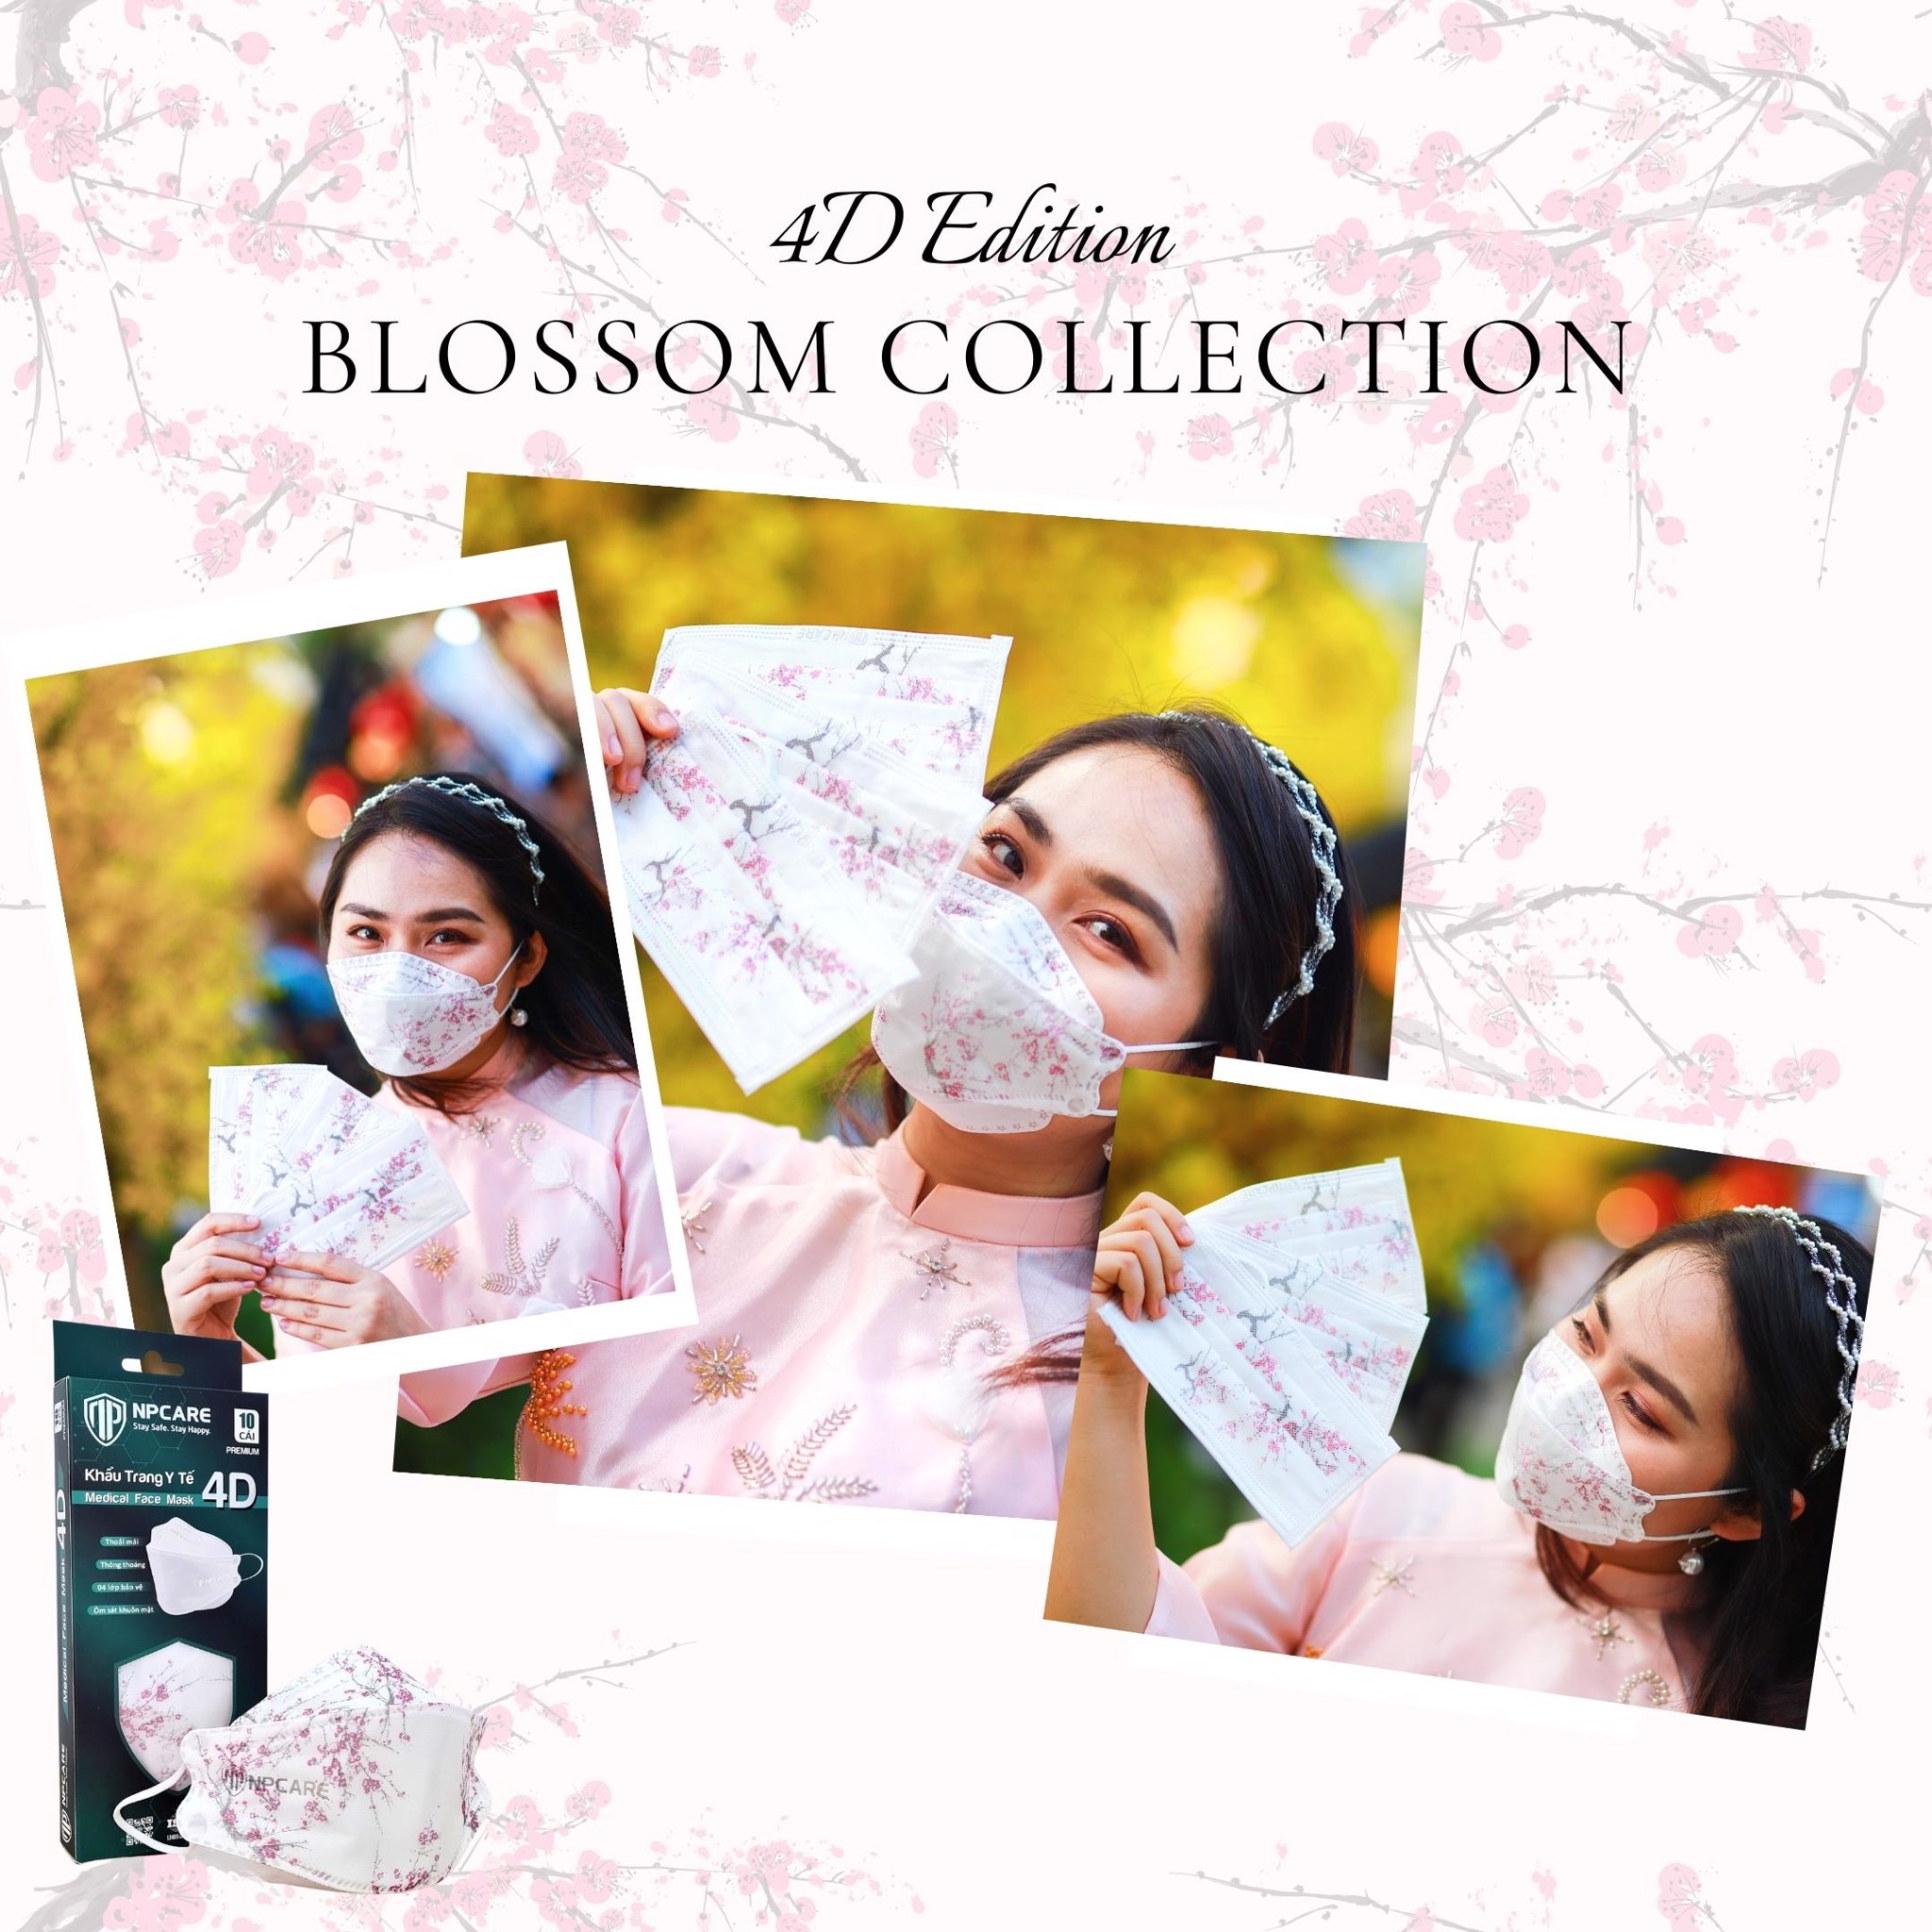 Blossom collection